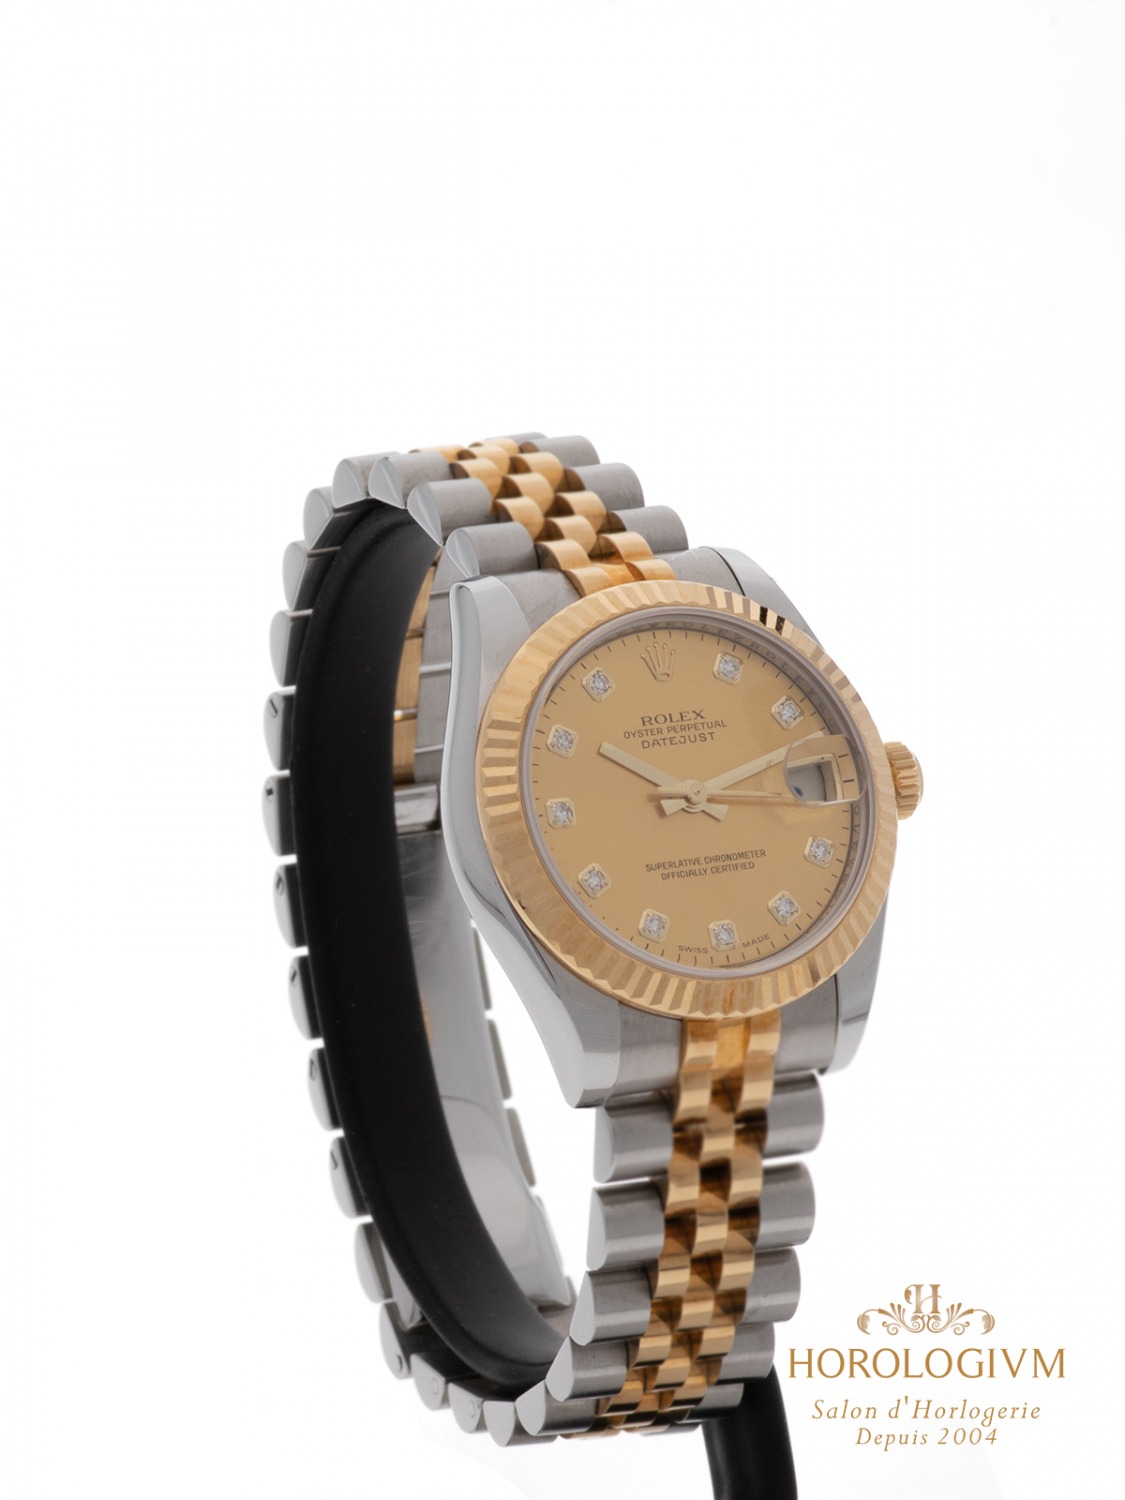 Rolex Datejust Gold & Steel 31MM Ref. 178273 watch, two-tone (bi-colored) silver & yellow gold (case) and yellow gold (bezel)